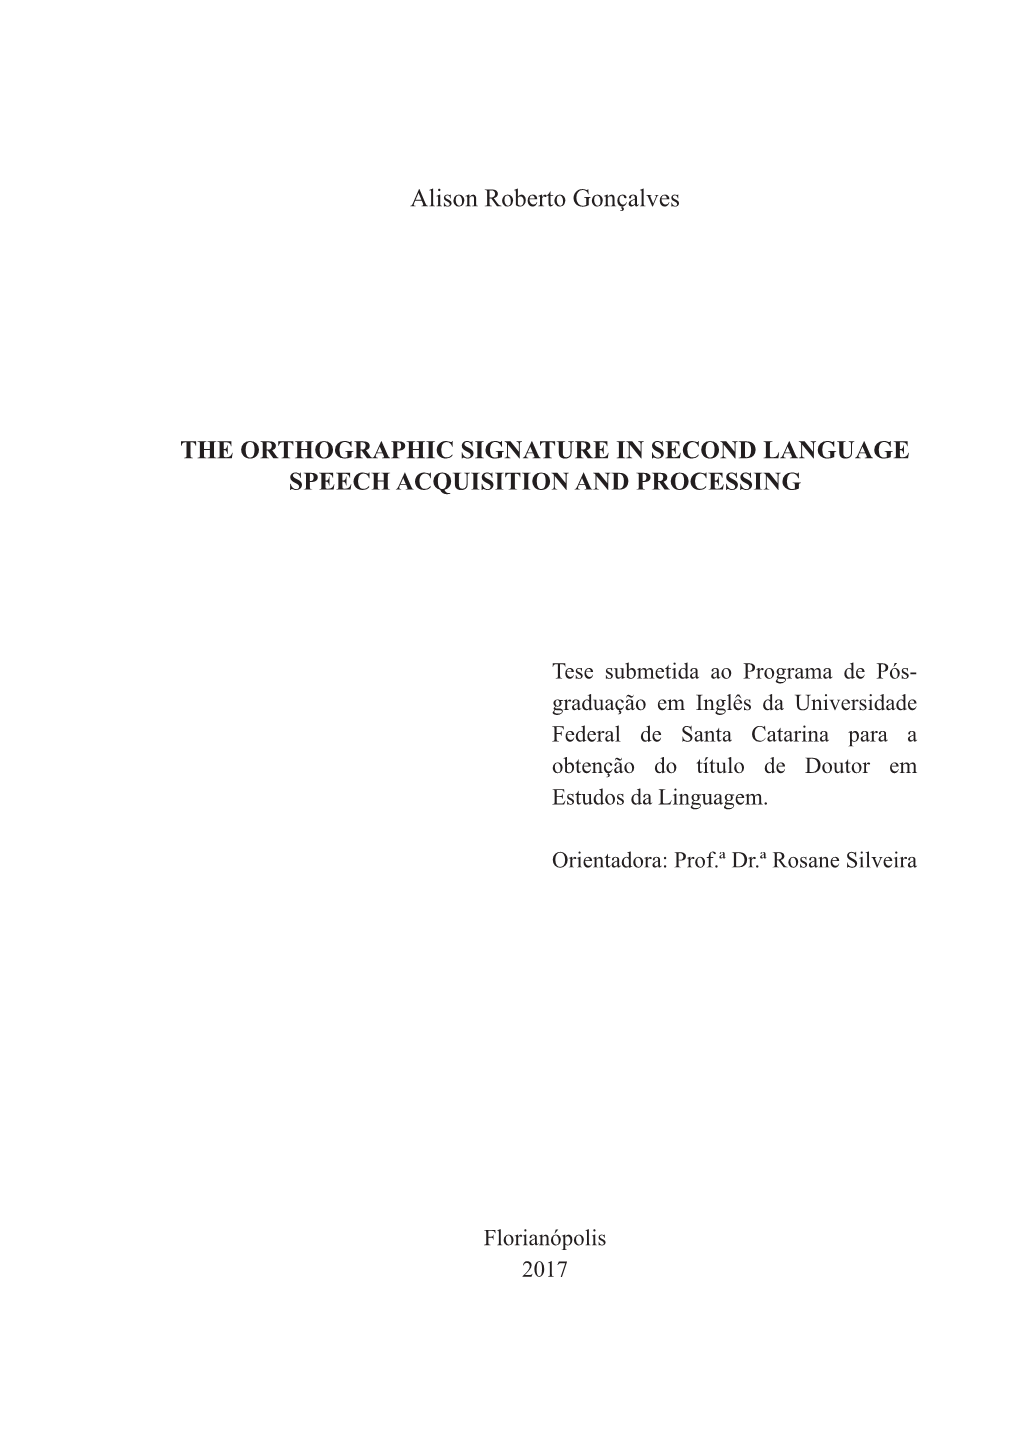 The Orthographic Signature in Second Language Speech Acquisition and Processing